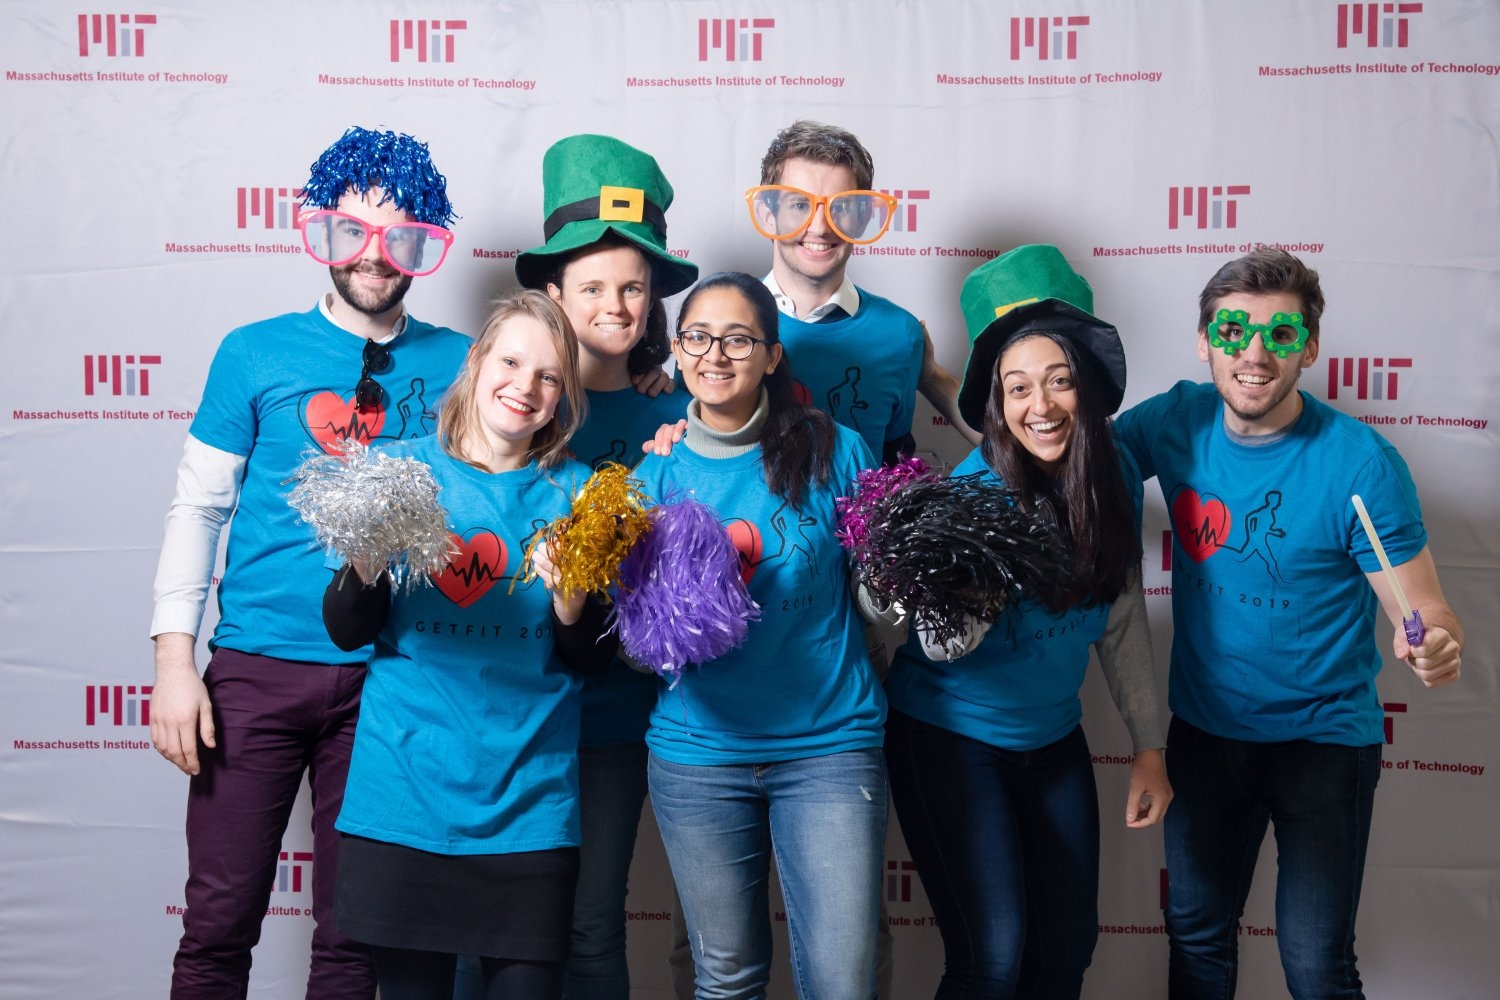 “I look forward to getfit every year because it’s the only thing motivating me to make an extra step in the winter,” says getfit participant Andrea Porras. Seen here: A 2019 MIT getfit team celebrates their accomplishments.